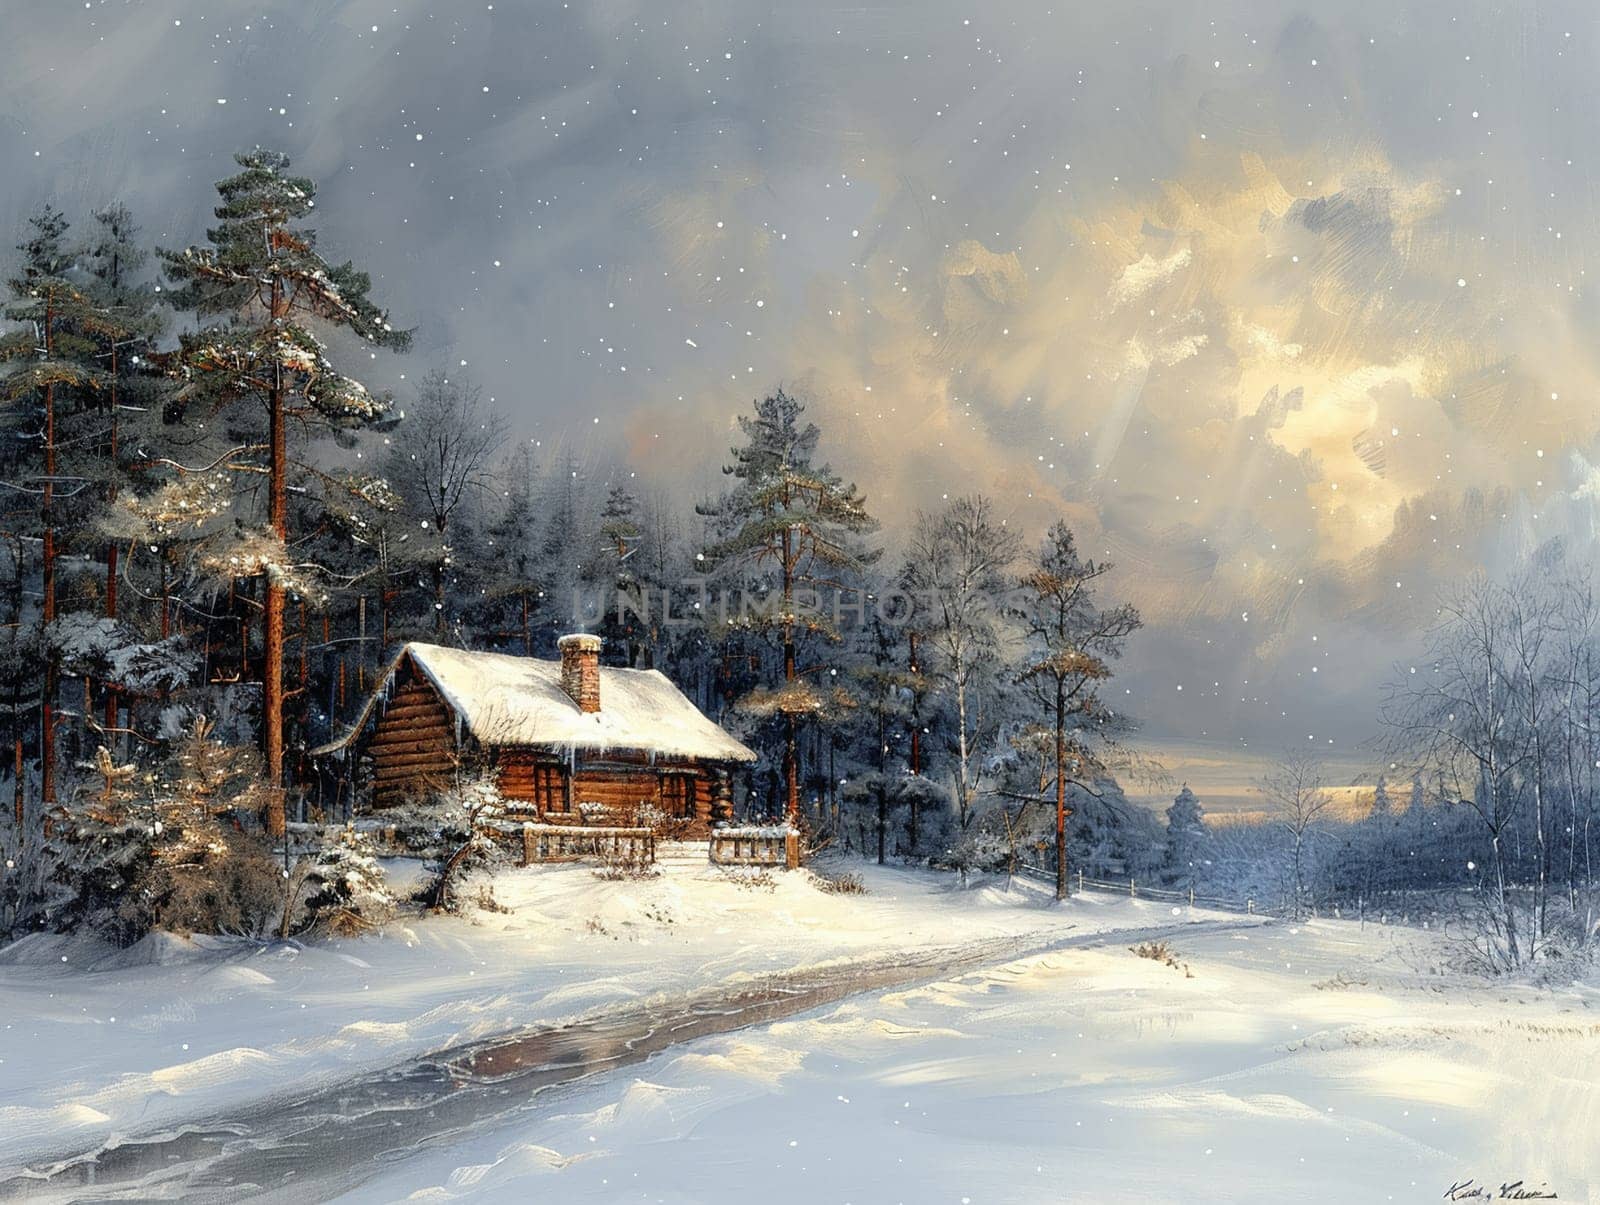 Illustration of a cozy winter cabin in acrylics, drawing attention to the warmth and solitude in a snowy landscape.